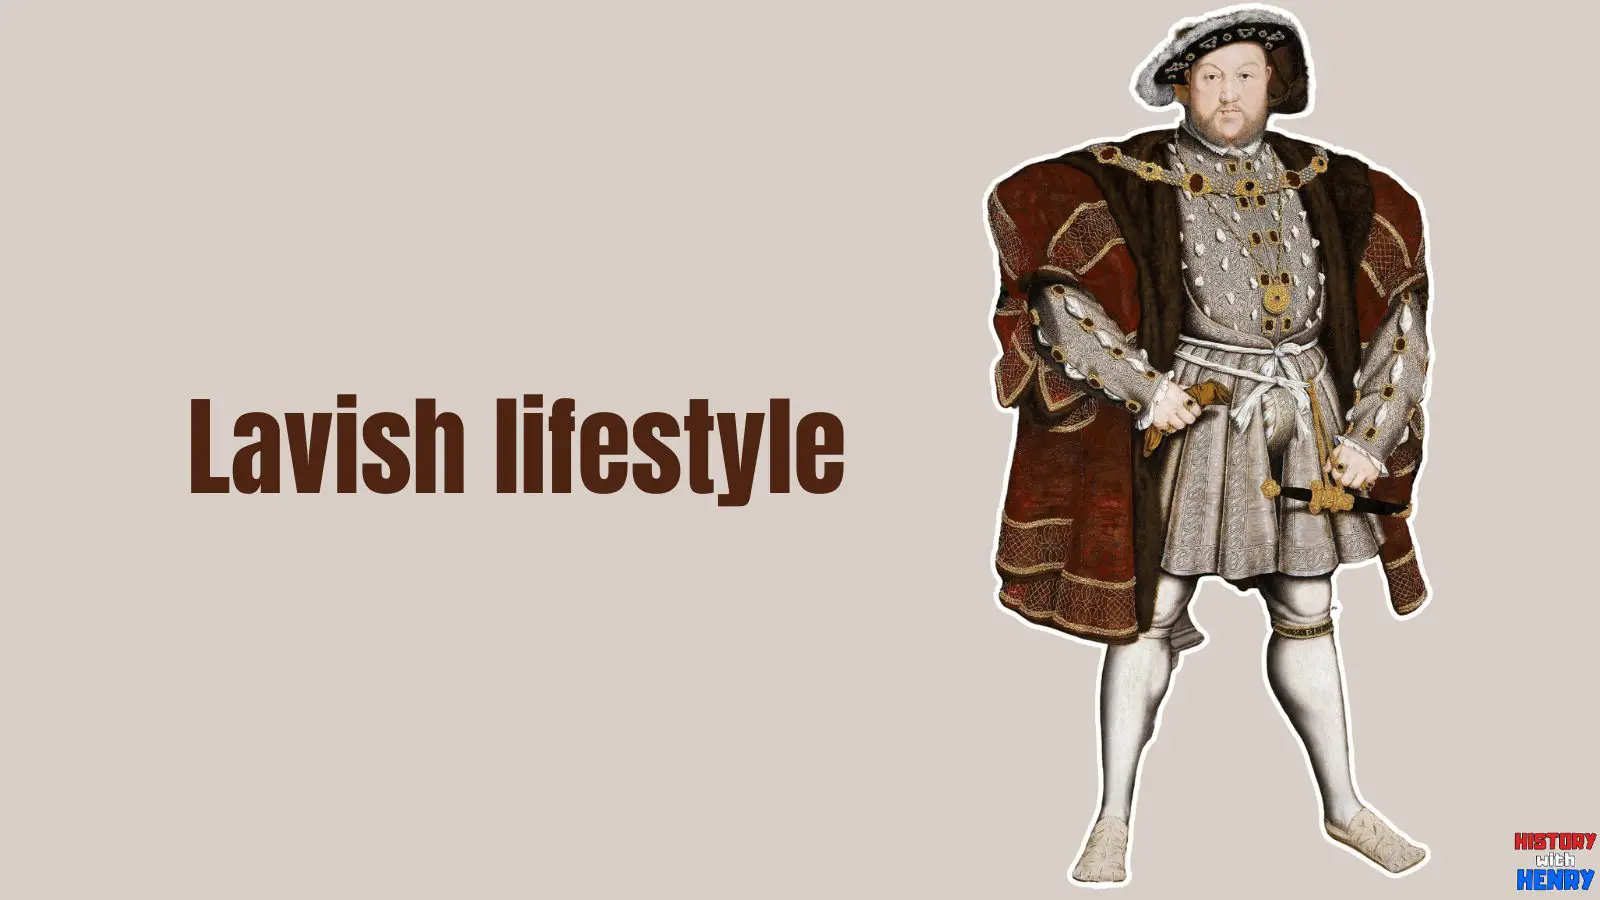 Henry VIII's biggest mistakes